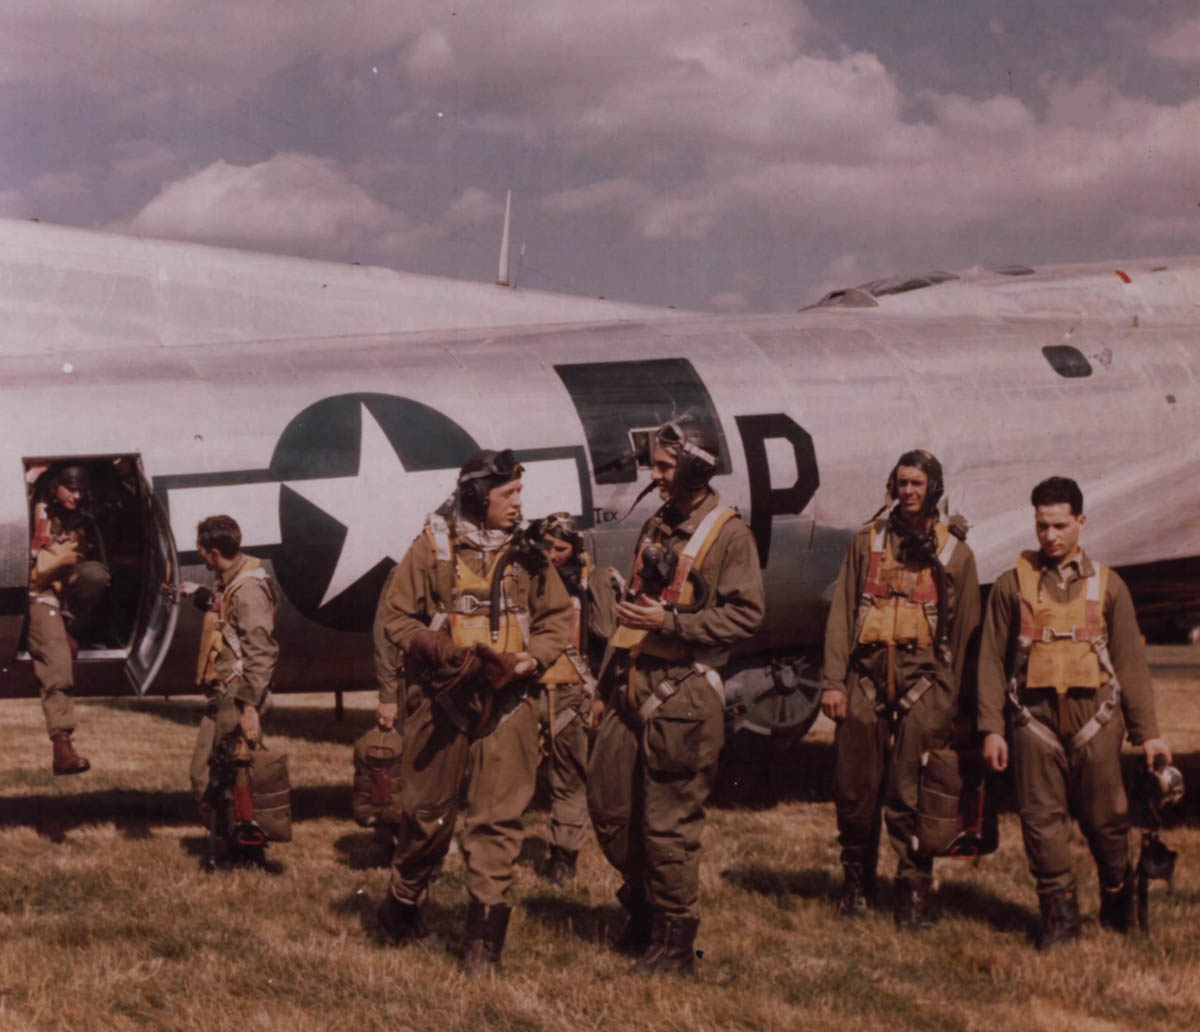 b17-flying-fortress-crew-color-photo.jpg